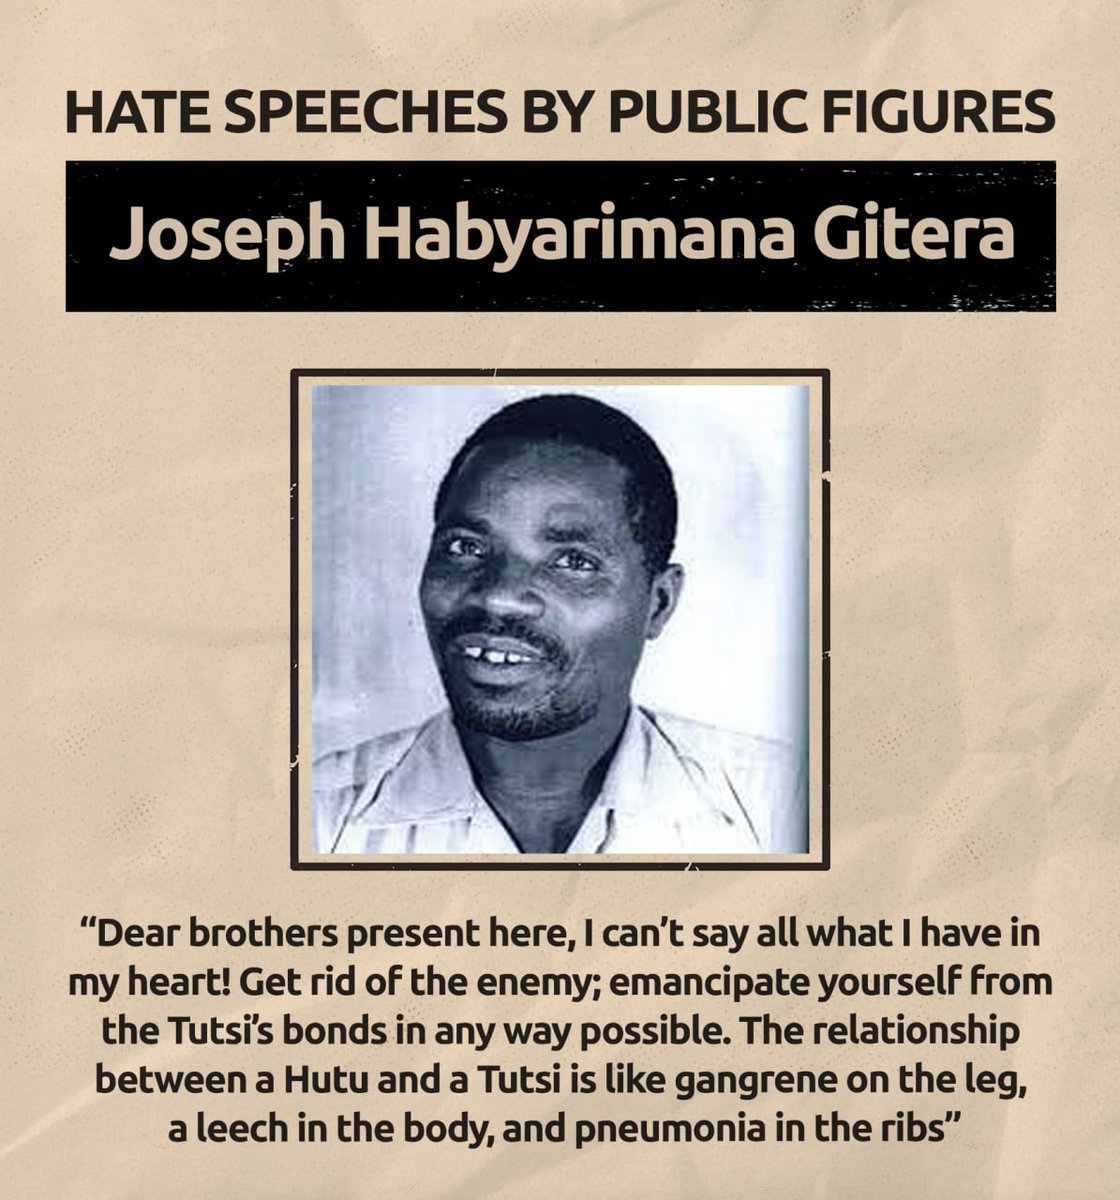 During APROSOMA meeting on February 15th, 1959, Gitera spread hate speech against the Tutsi, instructing the Hutu on discriminatory and divisive practices. “Dear brothers present here, I can’t say all what I have in my heart! Get rid of the enemy; emancipate yourself from the…